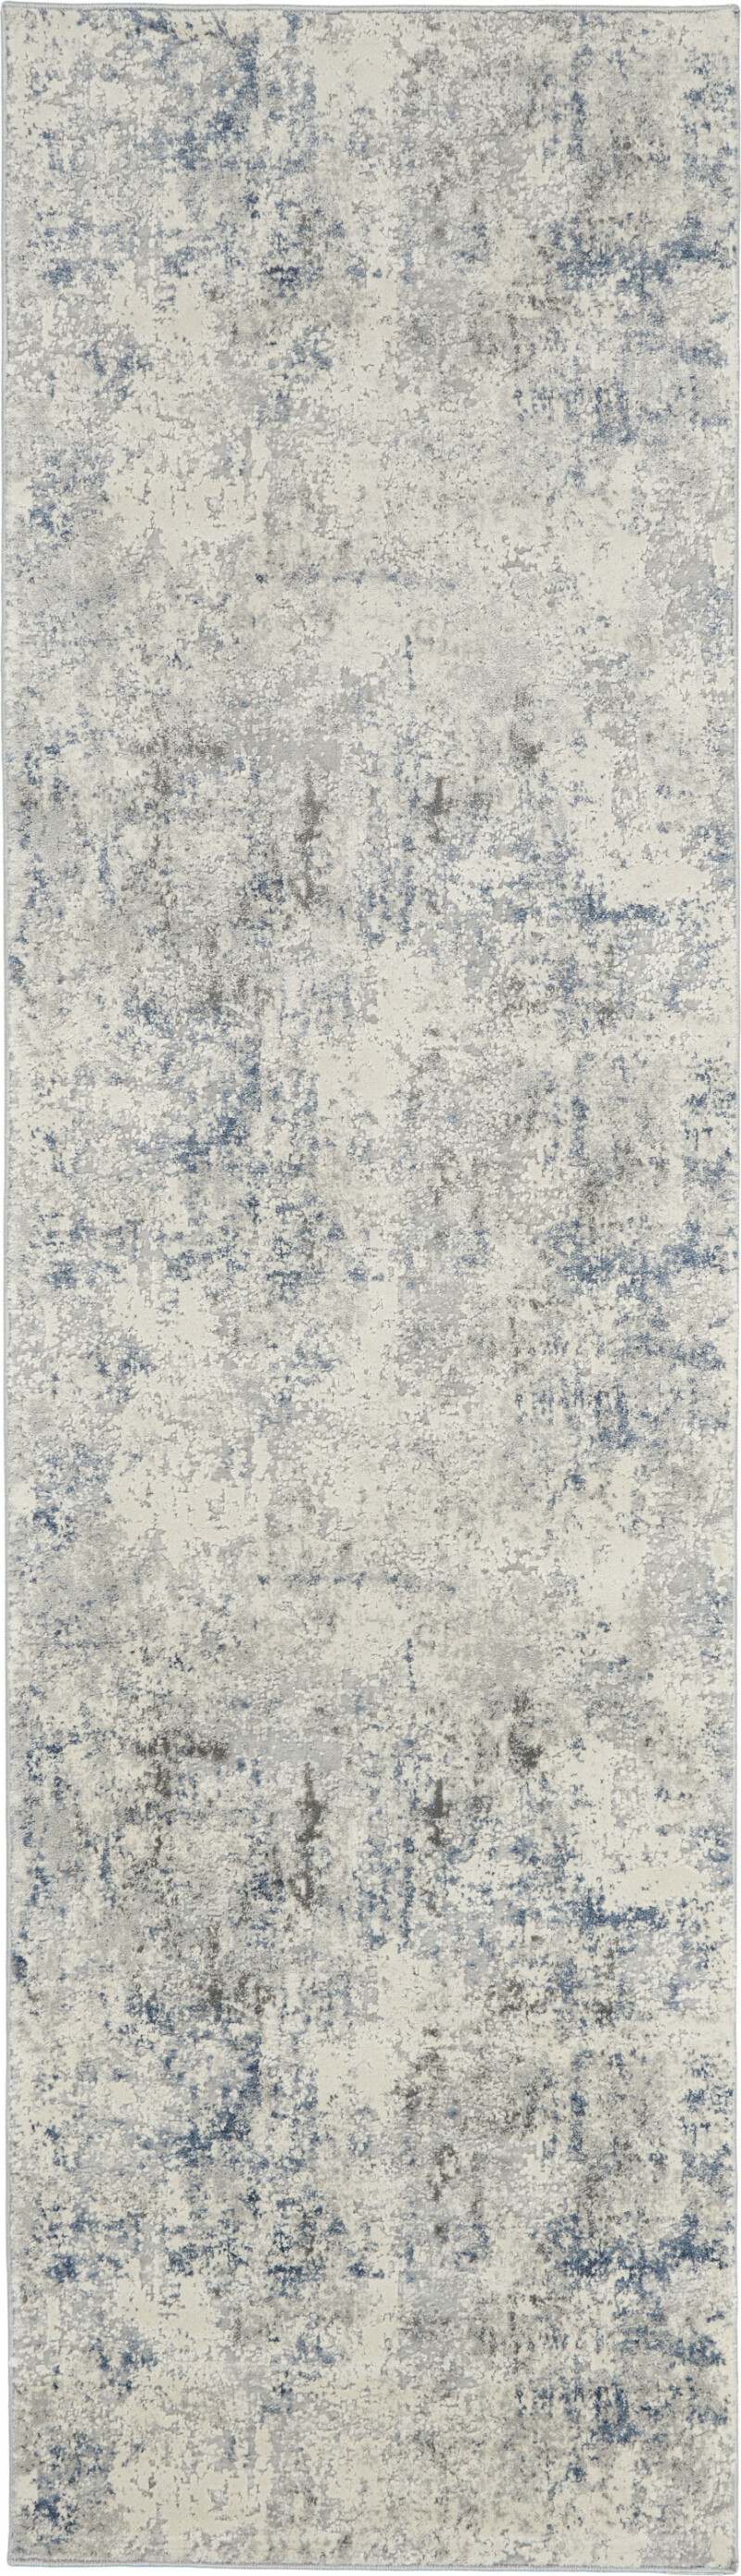 Rus07 Ivory Grey Blue Nourison Rustic Textures Runner Area Rug